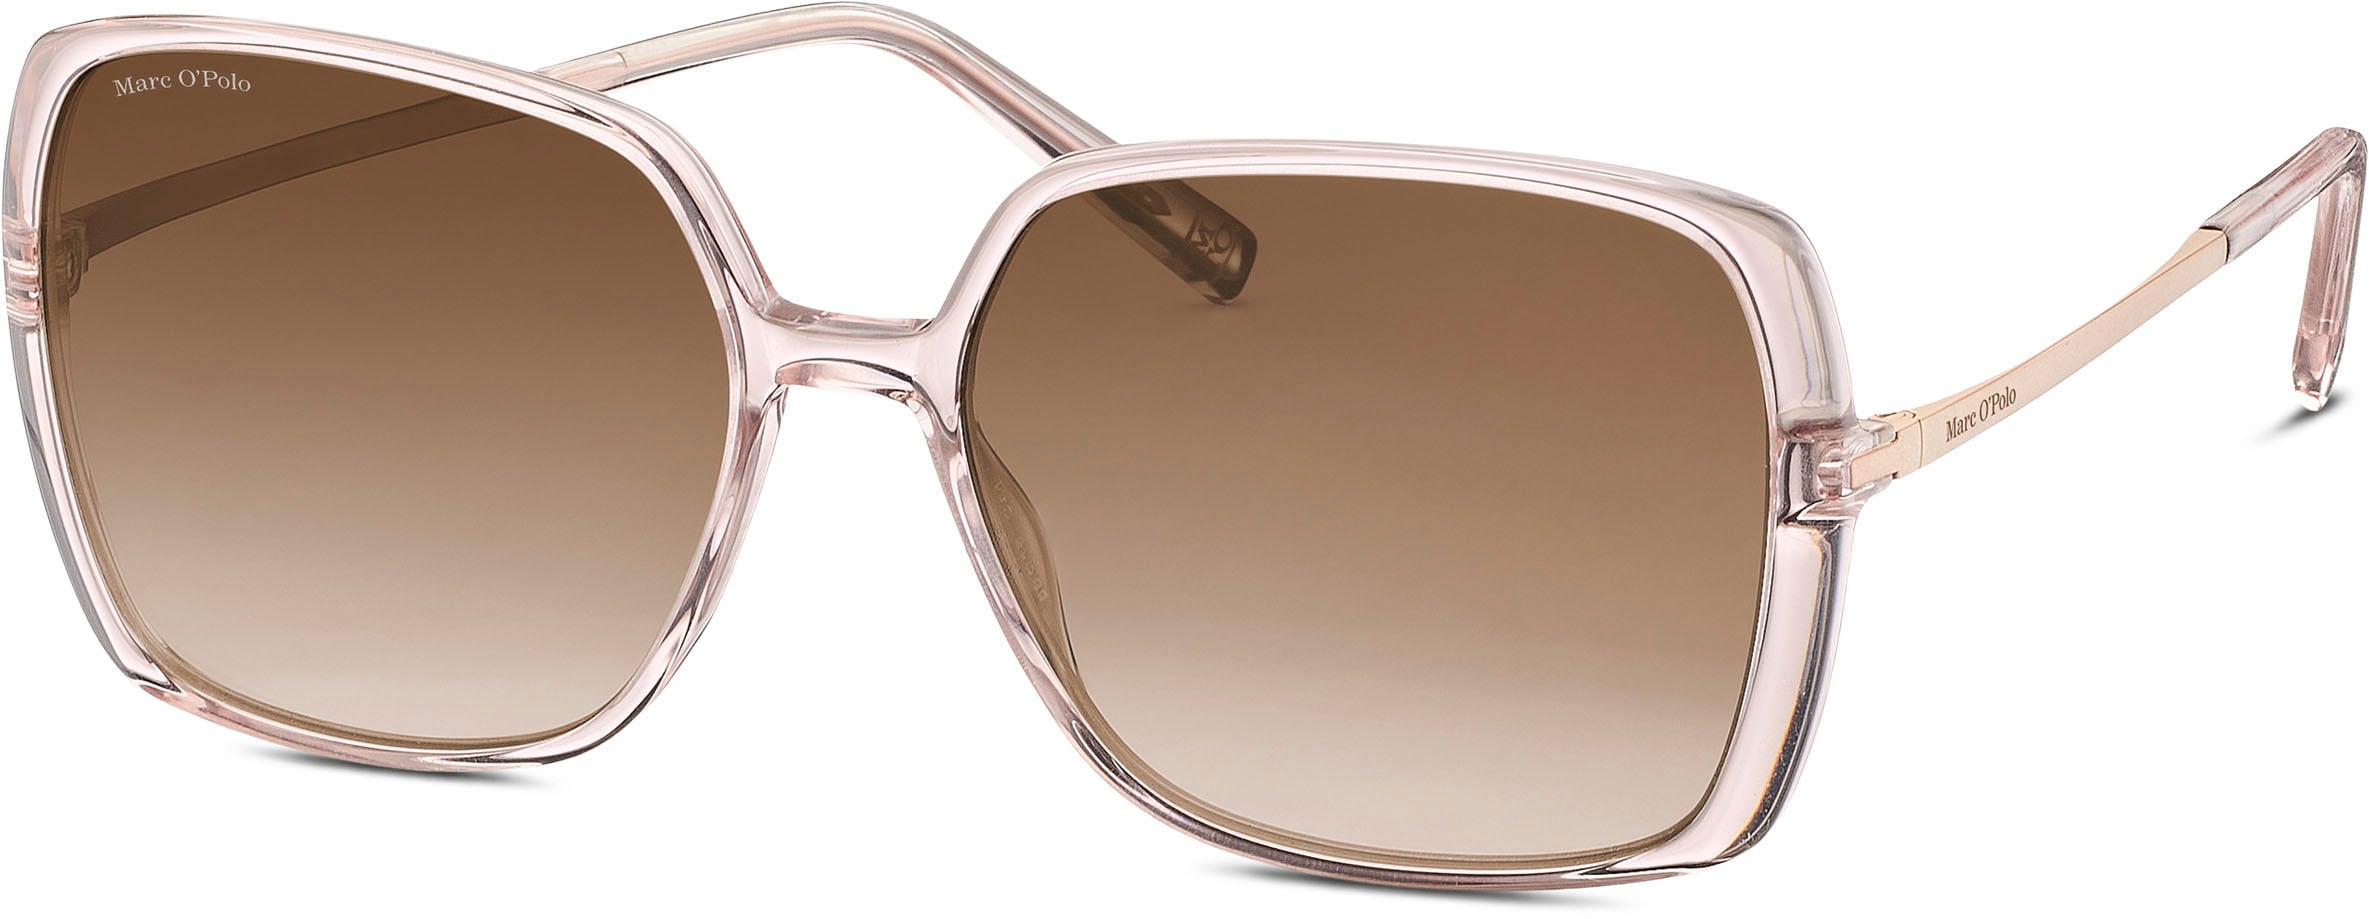 Marc O'Polo Sonnenbrille »Modell 506190«, Karree-From online bei